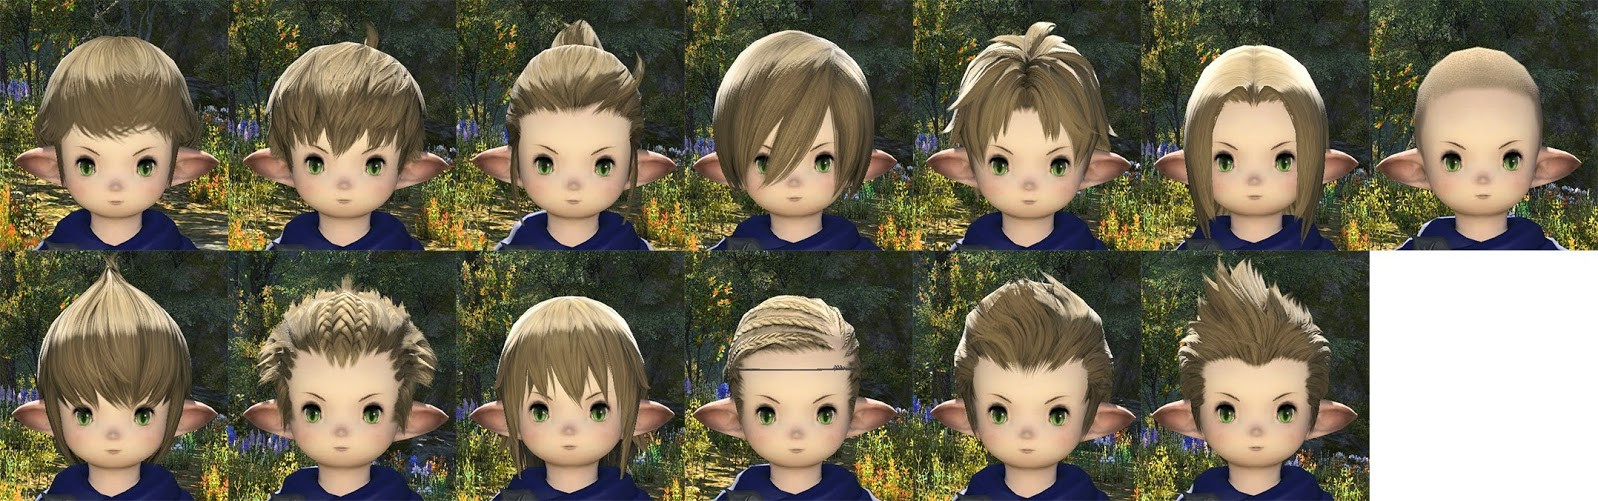 ffxiv character creation 69. 